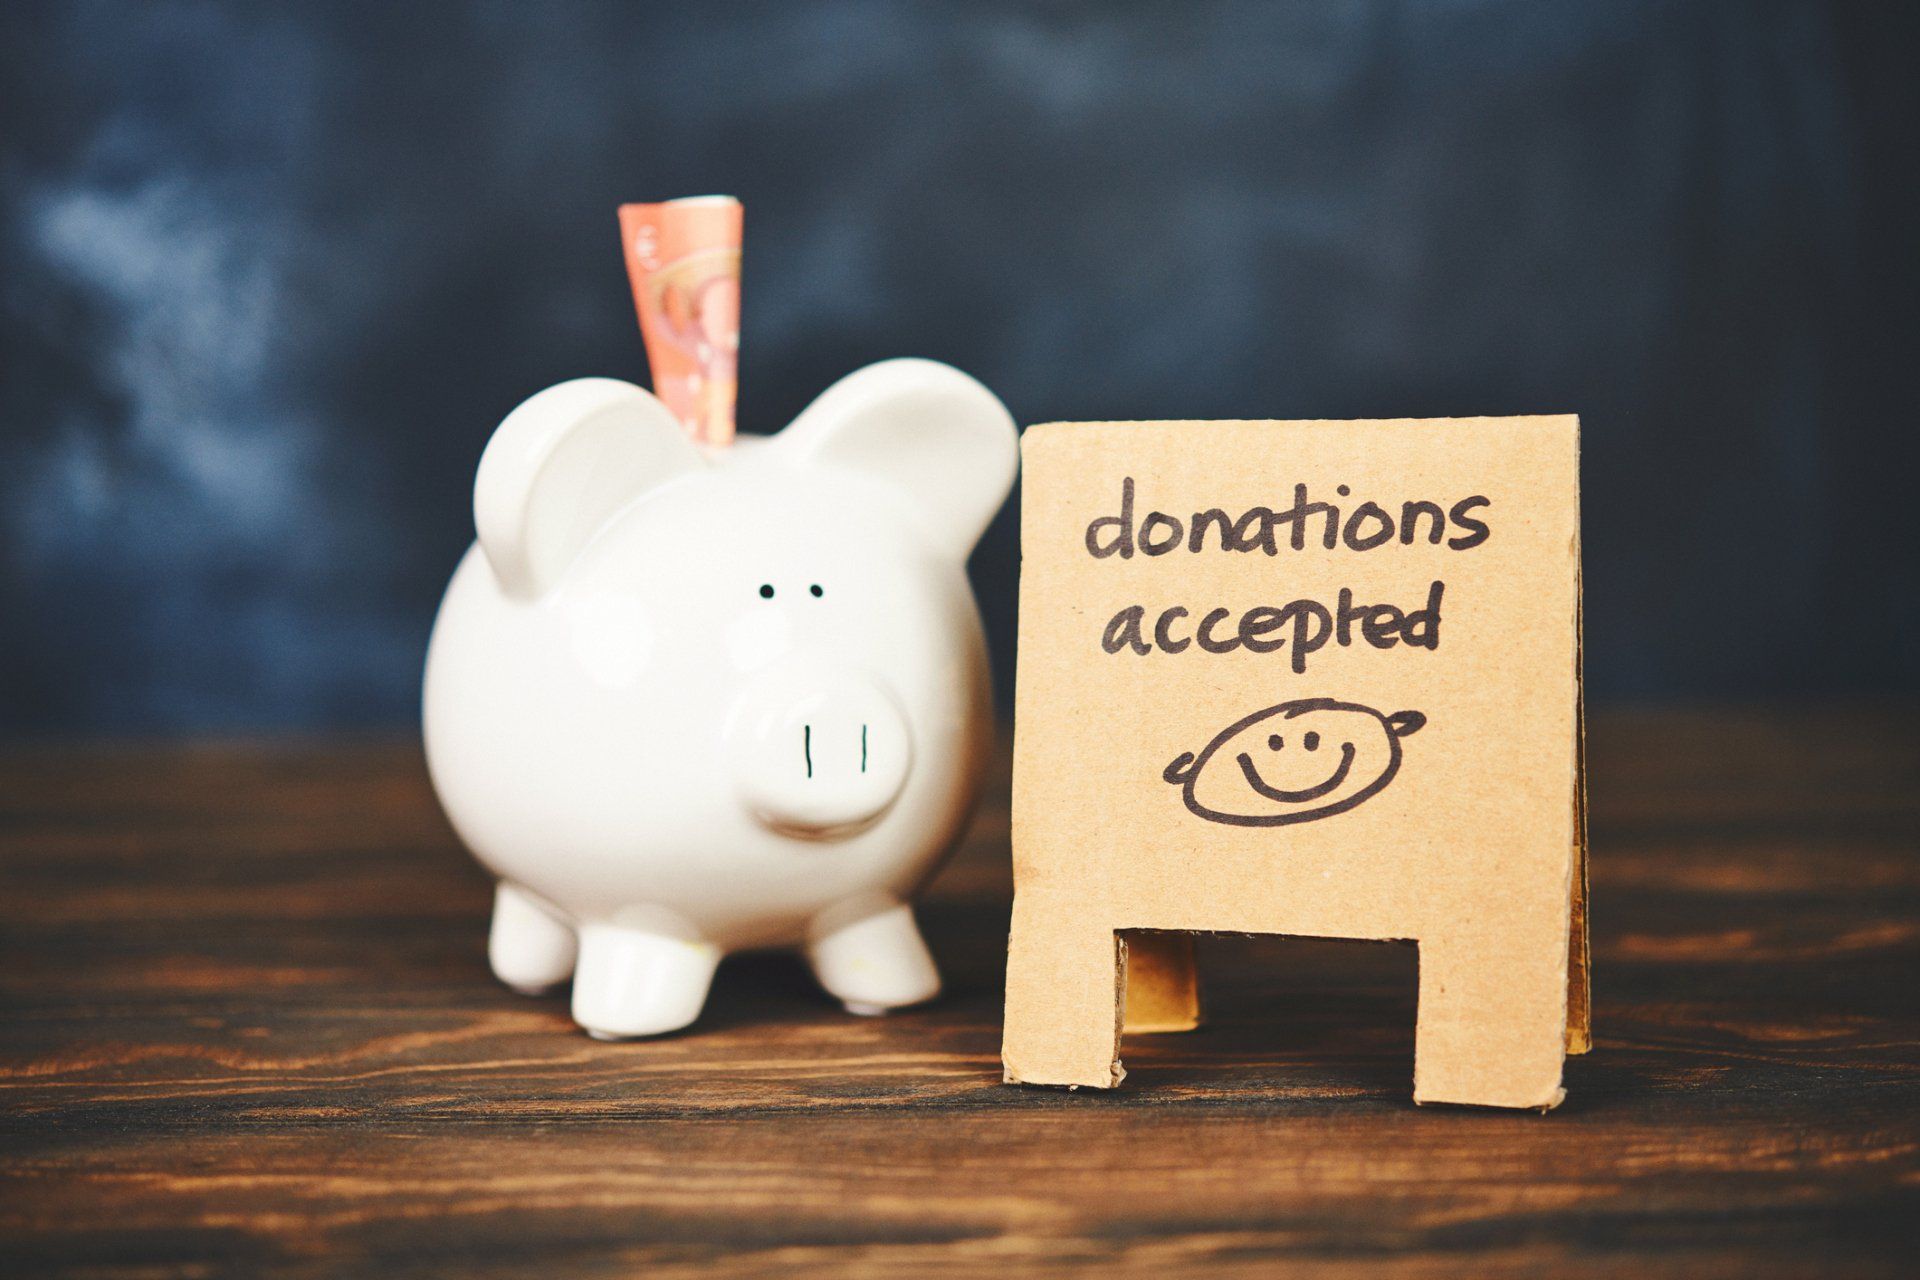 Money Donations - Whitewater, WI - Learning Depot